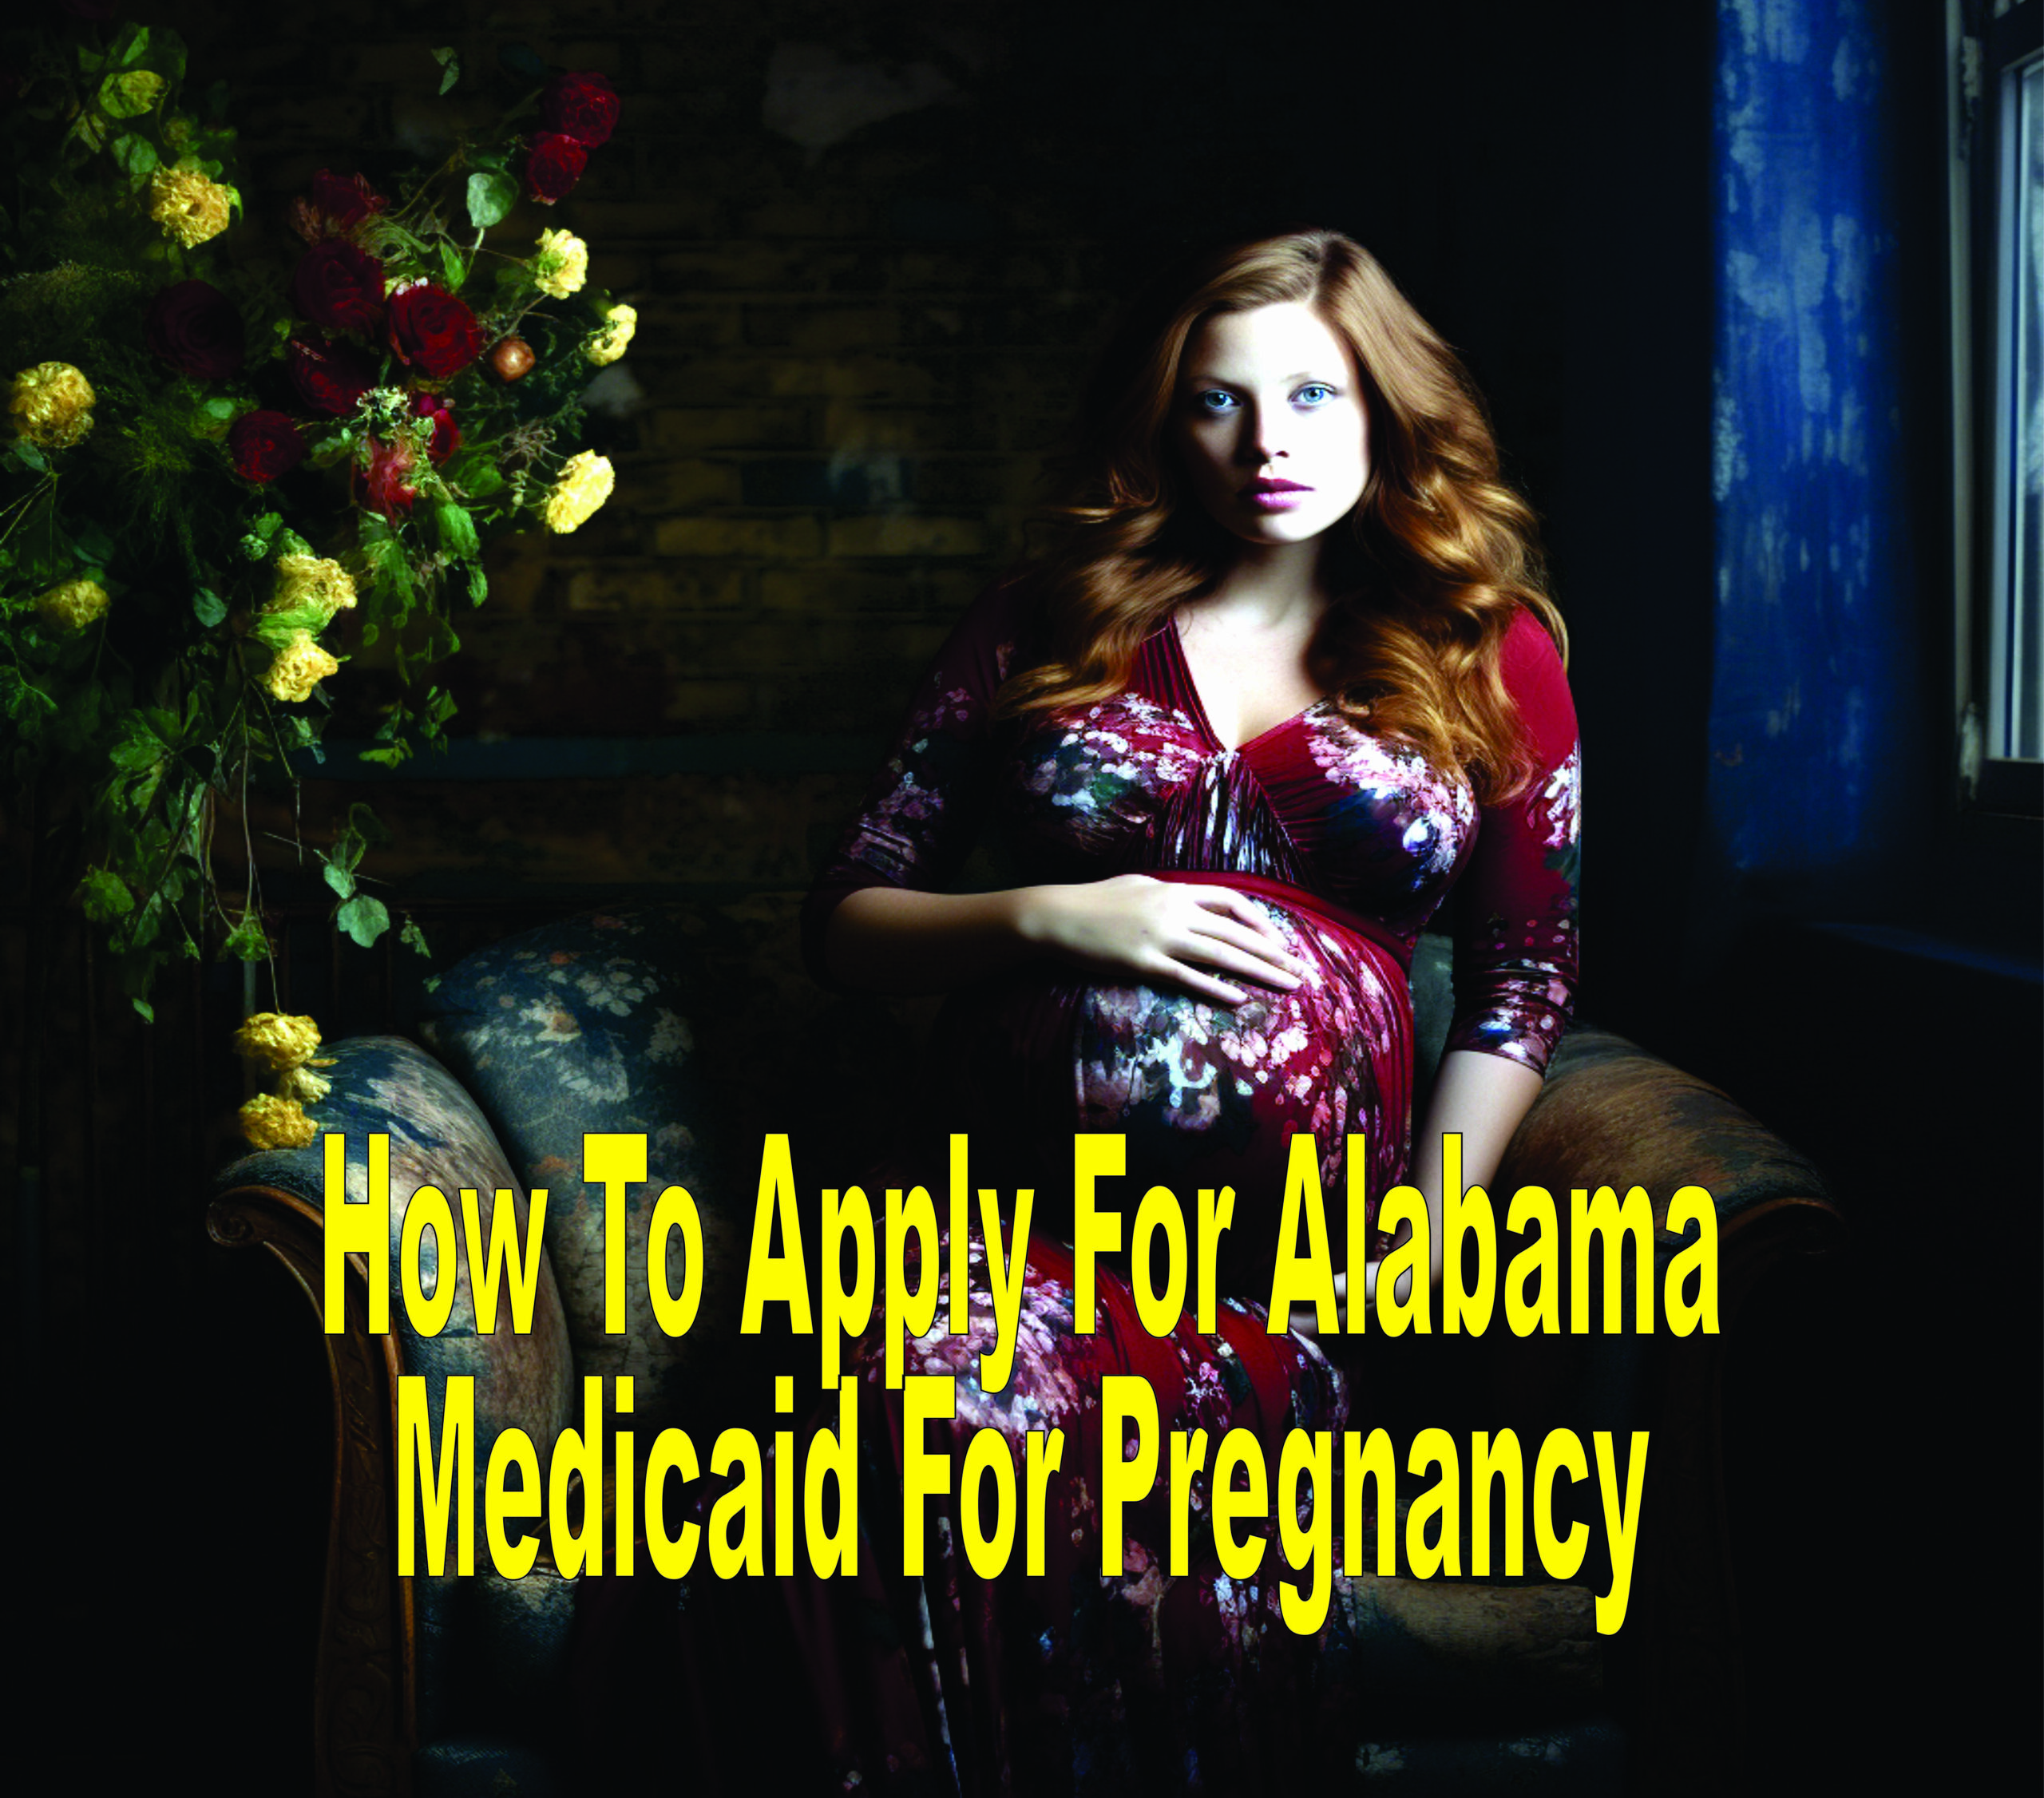 How To Apply For Alabama Medicaid For Pregnancy